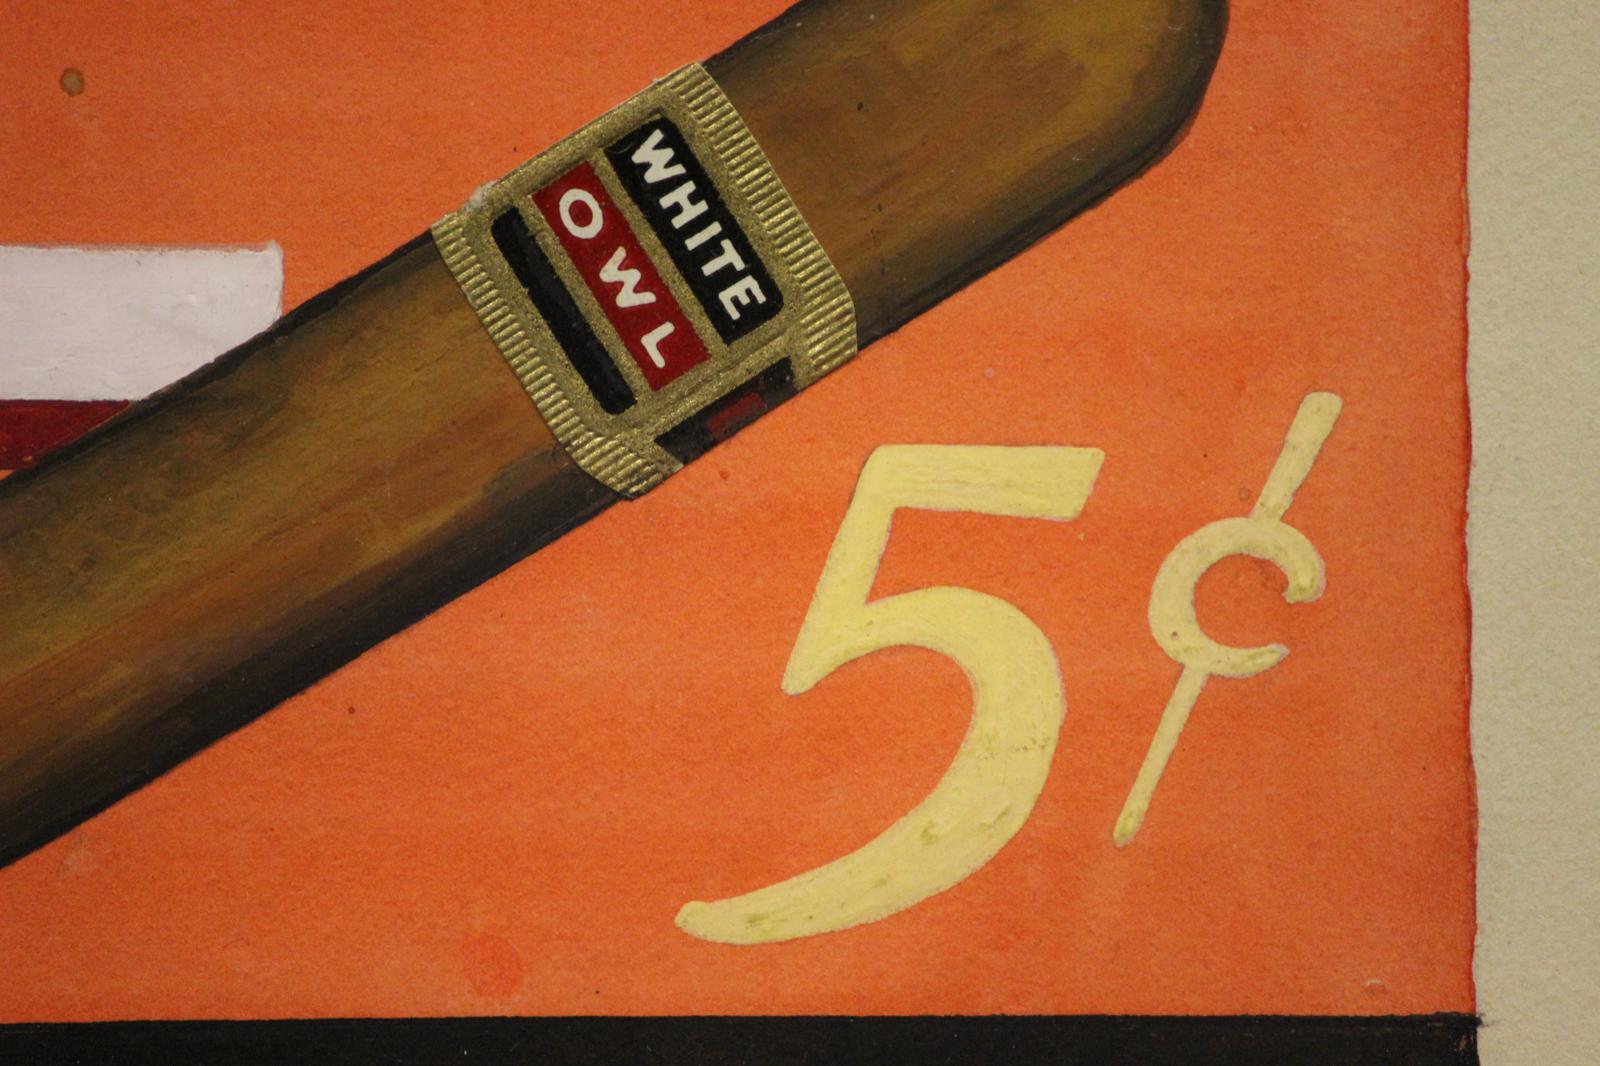 Hand-gouache advert sign for White Owl Cigars at 5¢ depicting a dapper gent puffing away

Art Sz: 7 3/4